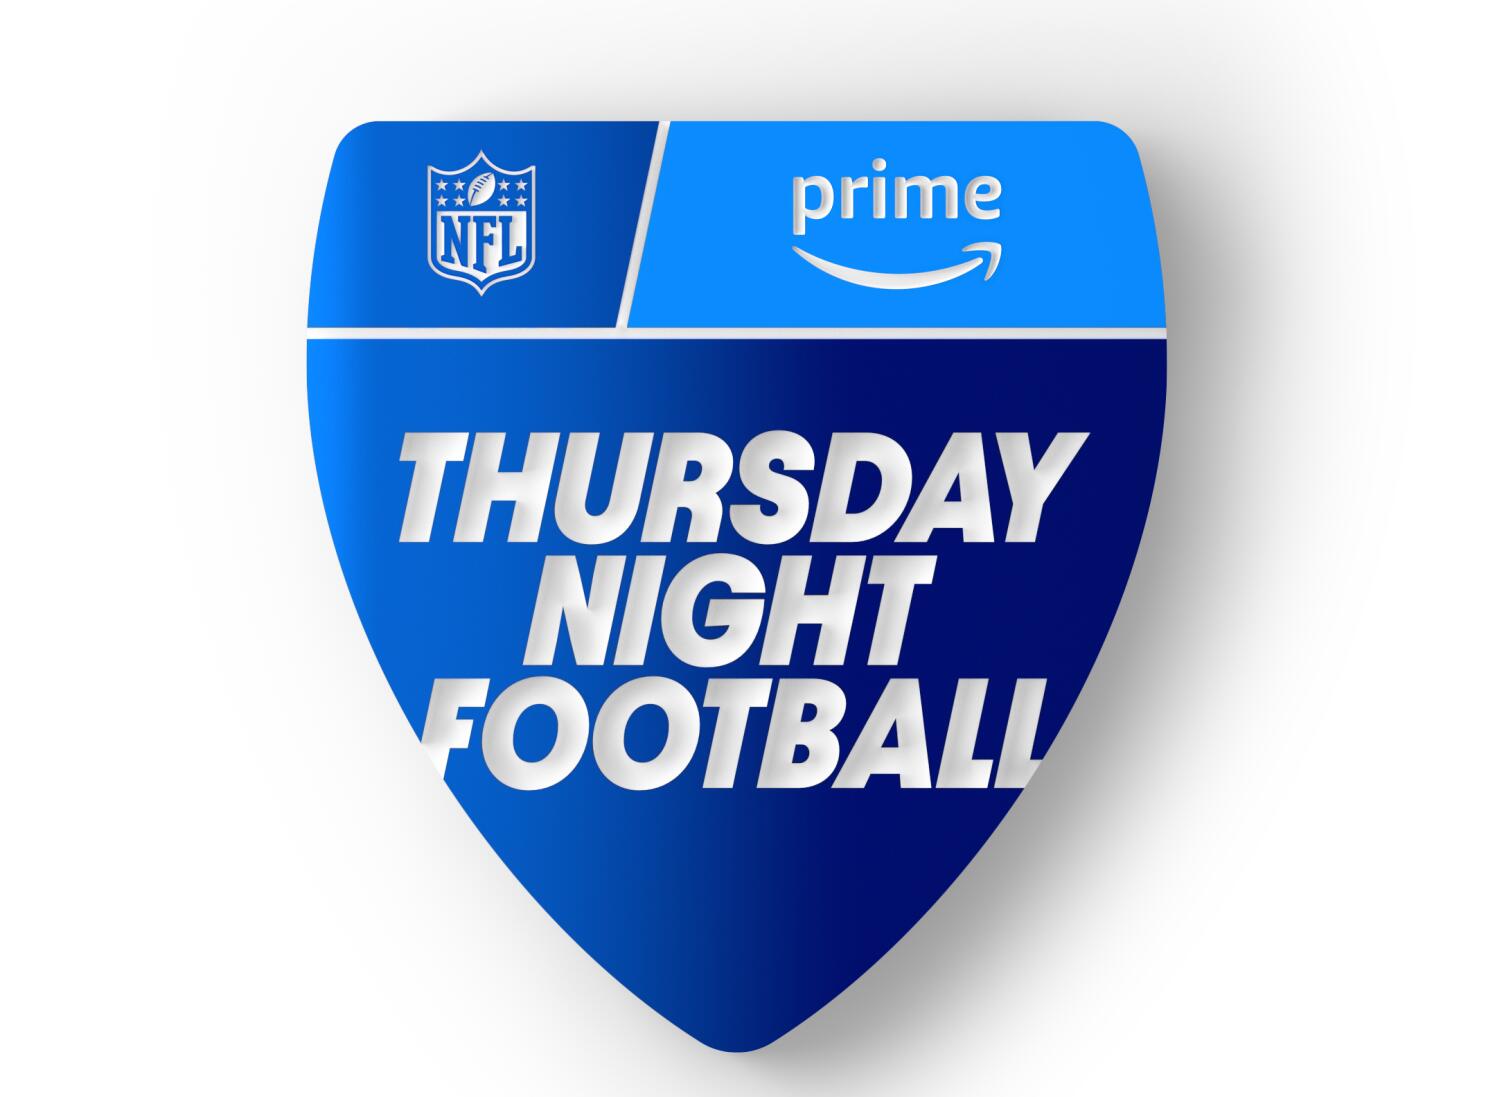 watch football on prime